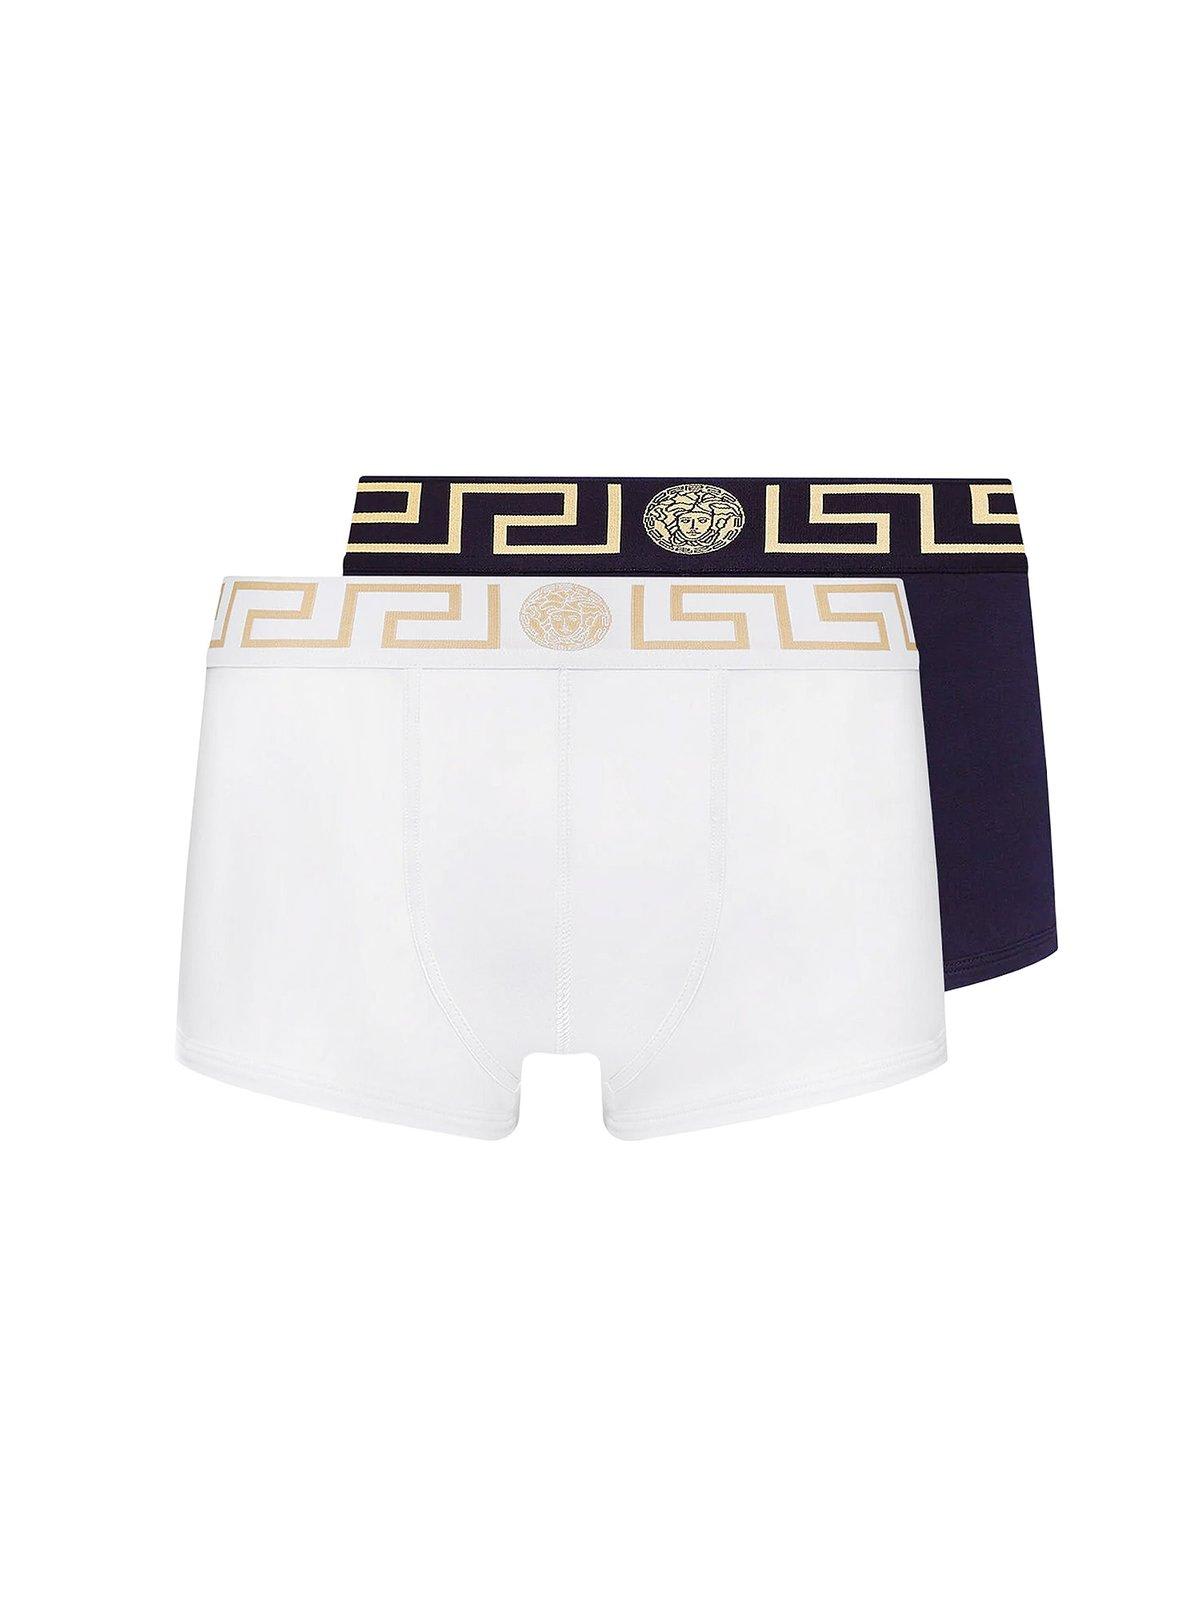 VERSACE LOGO BAND TWO-PACK BOXERS